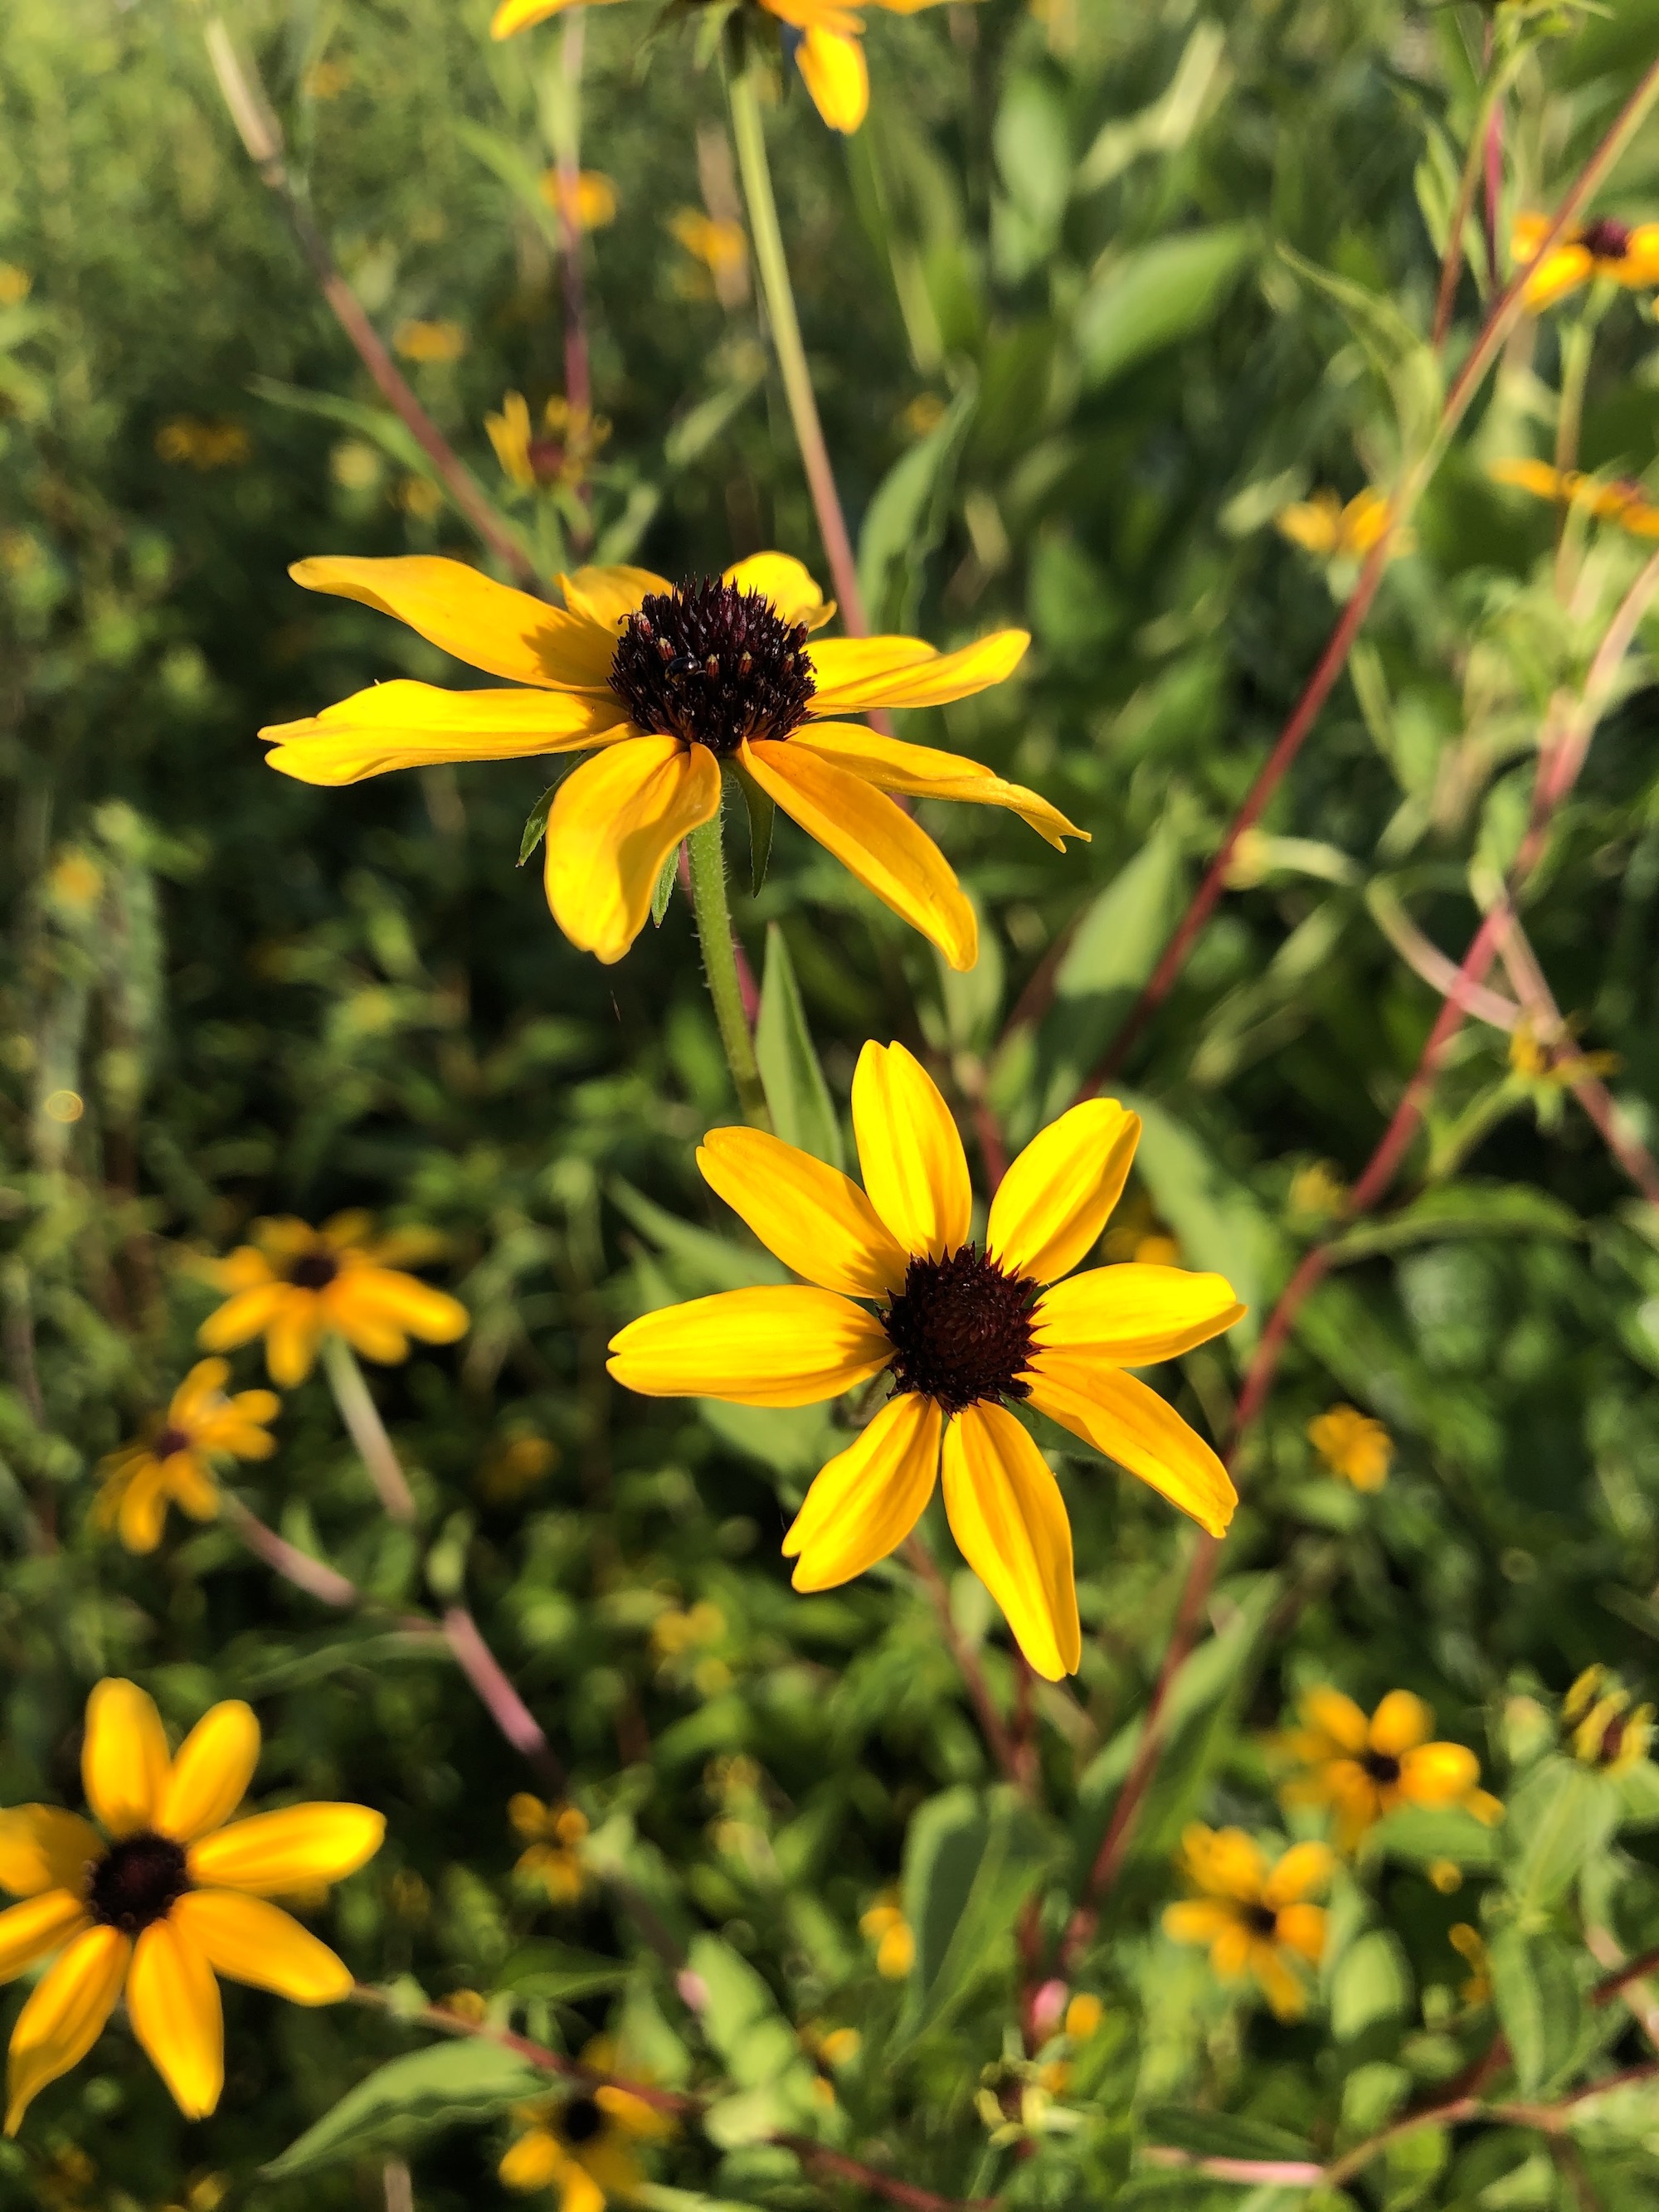 Brown-eyed Susan on bank of retaining pond in Madison, Wisconsin on July 31, 2020.